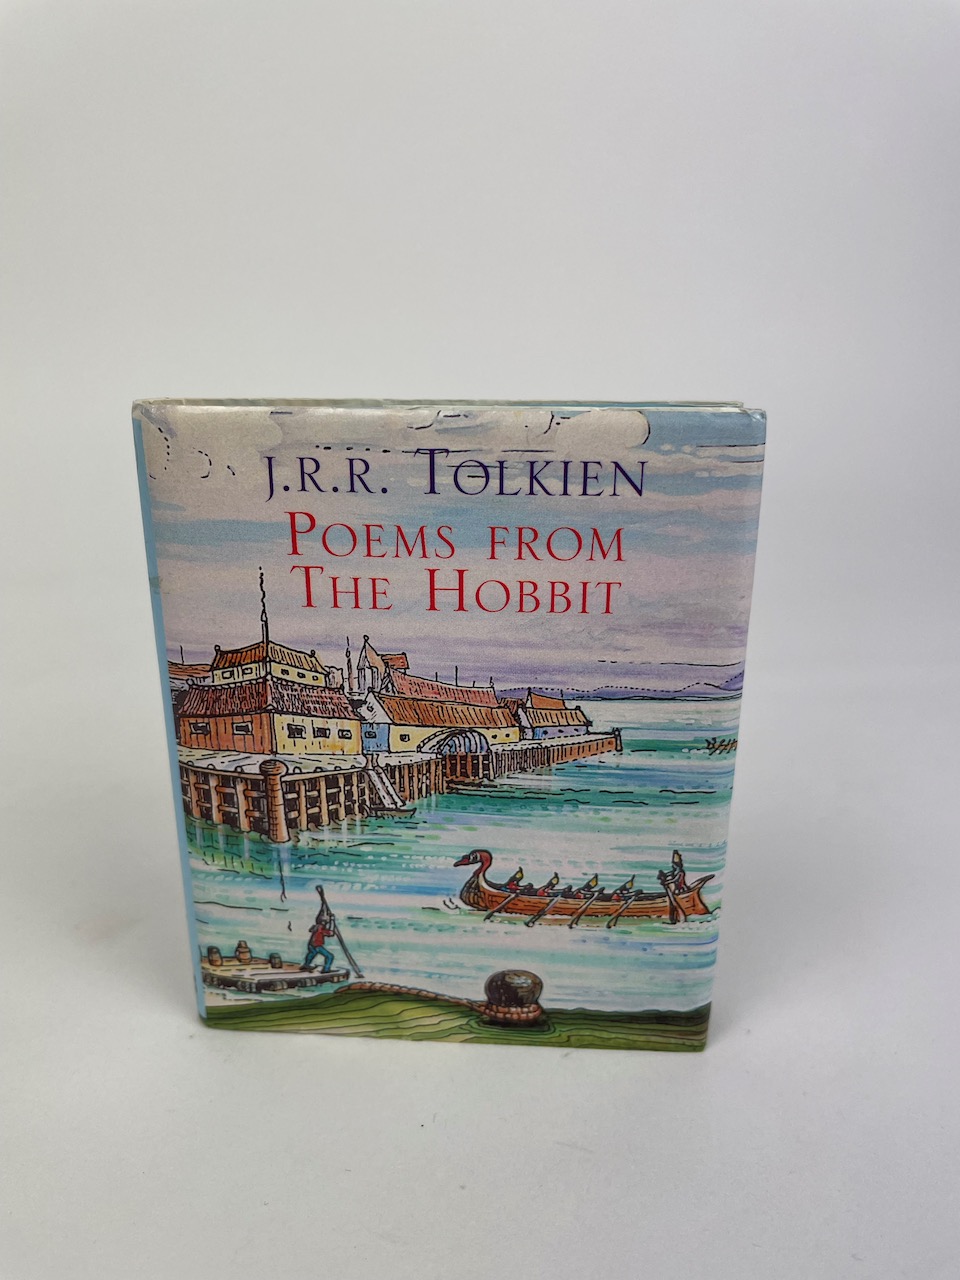 Poems from the Hobbit miniature book illustrated by Tolkien 1